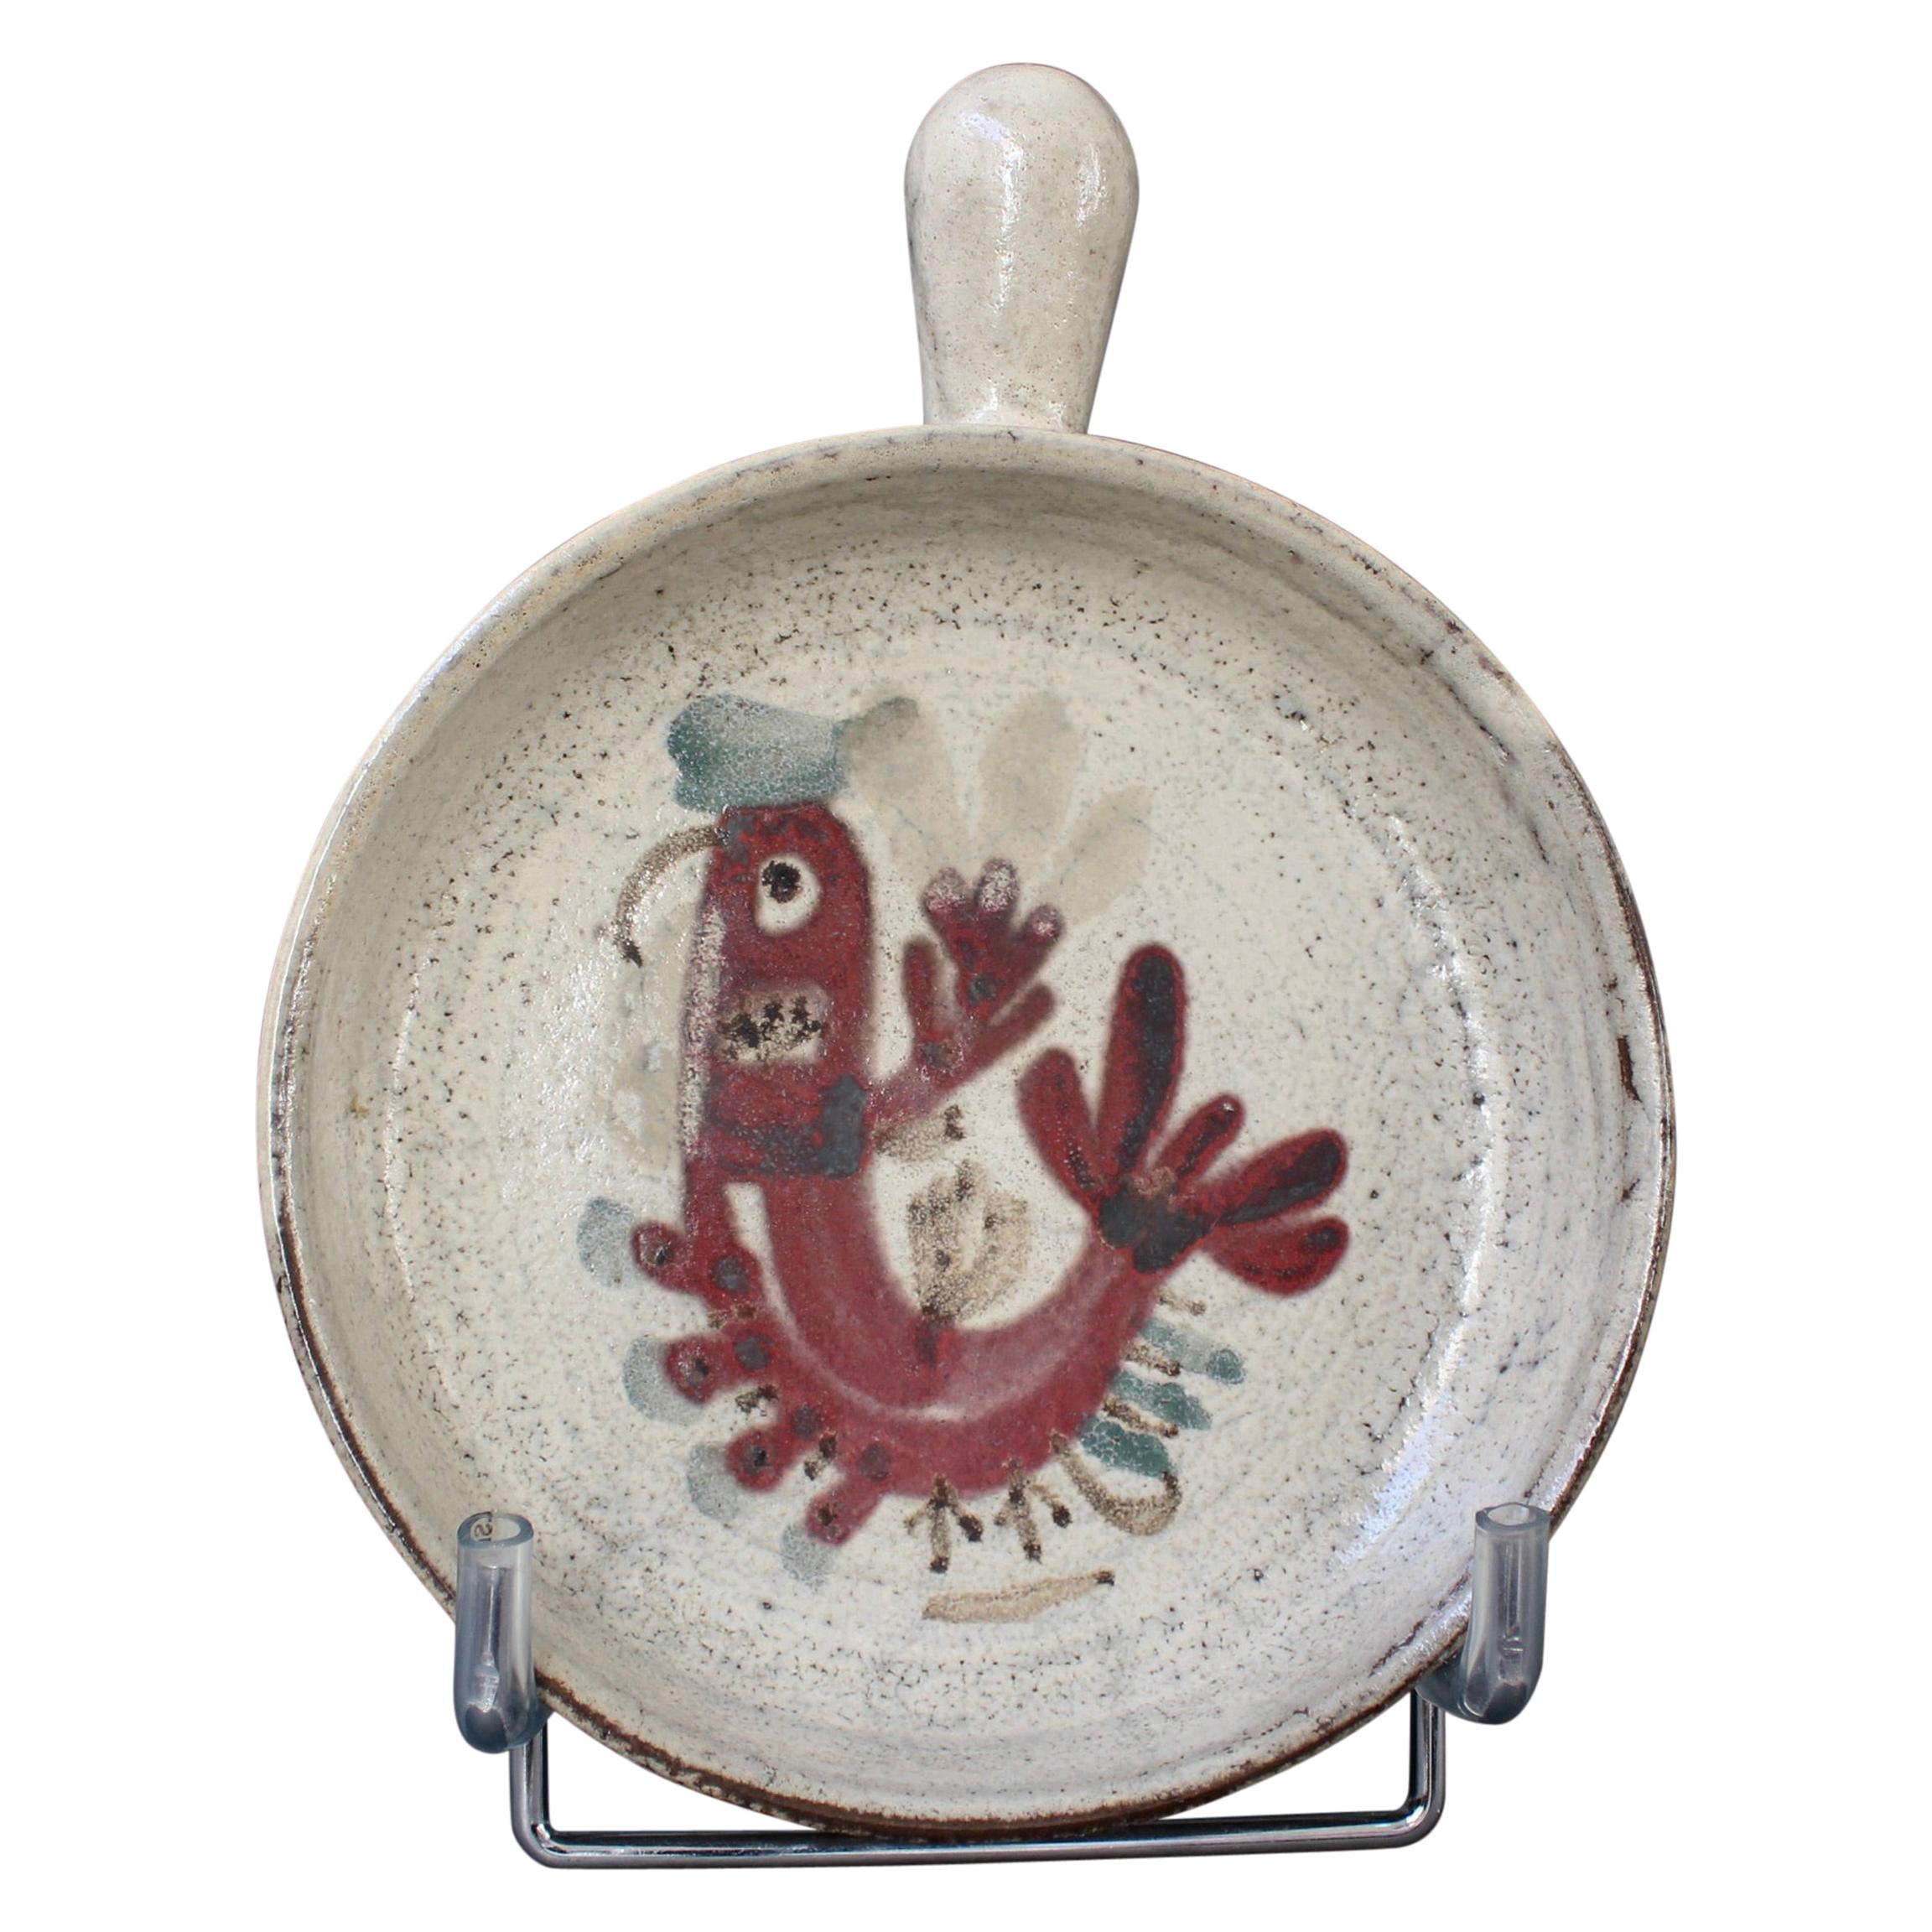 French Ceramic Decorative Serving Dish by Gustave Reynaud, Le Mûrier, c. 1960s